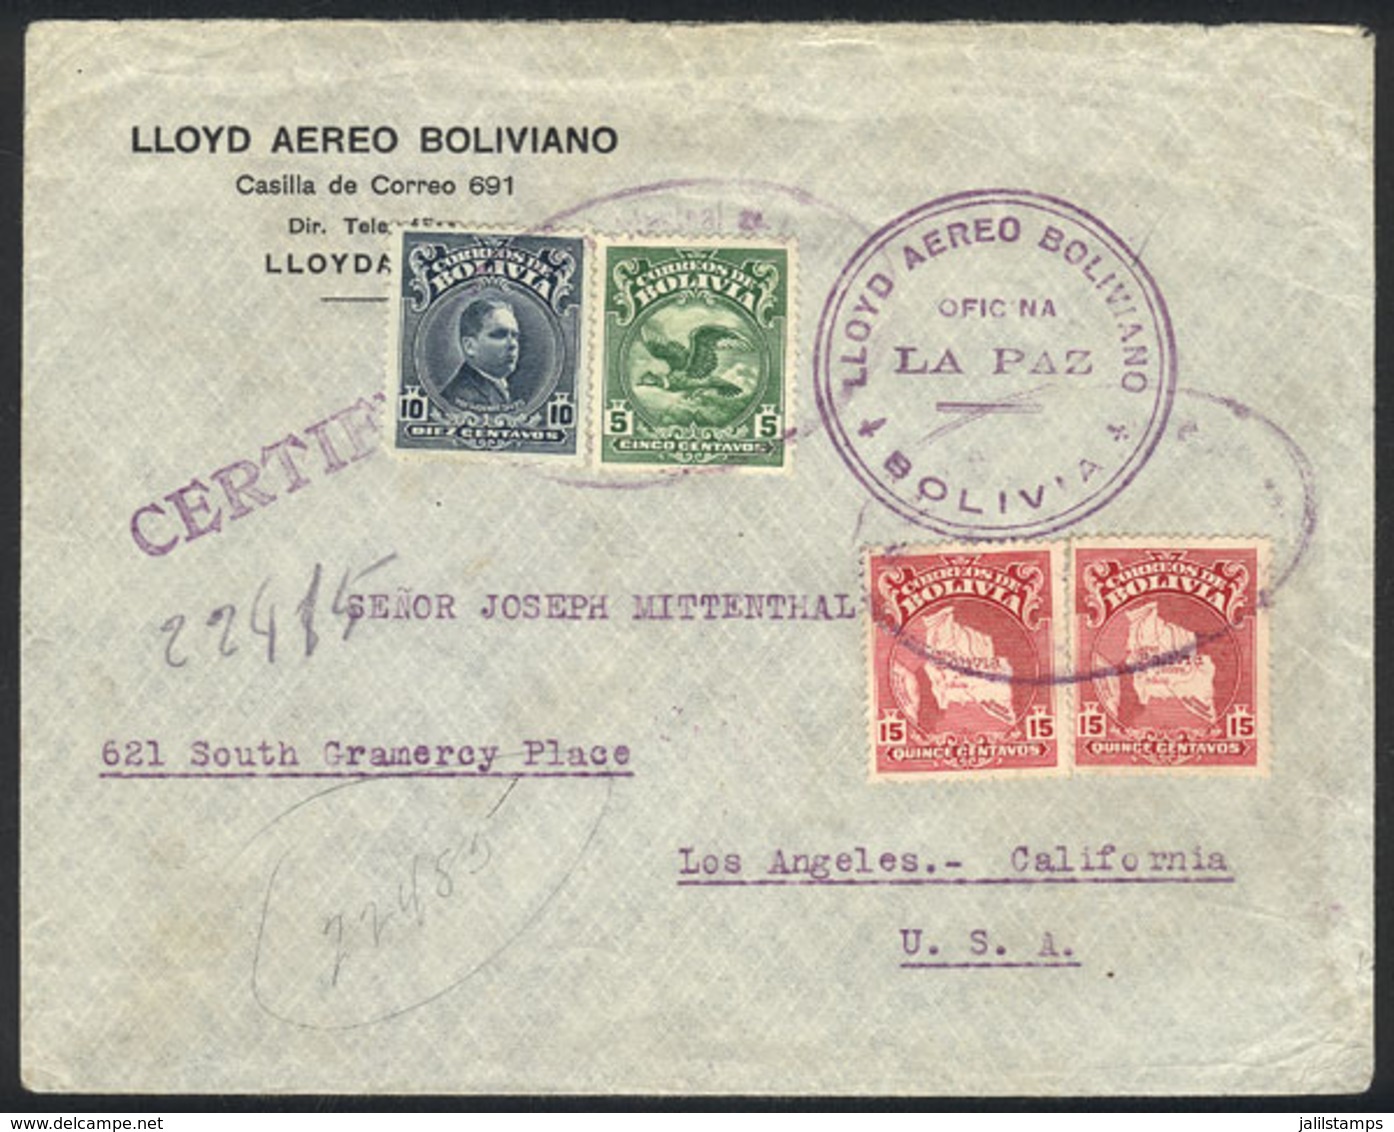 845 BOLIVIA: Airmail Cover Carried By LAB From La Paz To Los Angeles (USA) In SE/1930 Franked With 45c., Dispatched From - Bolivia